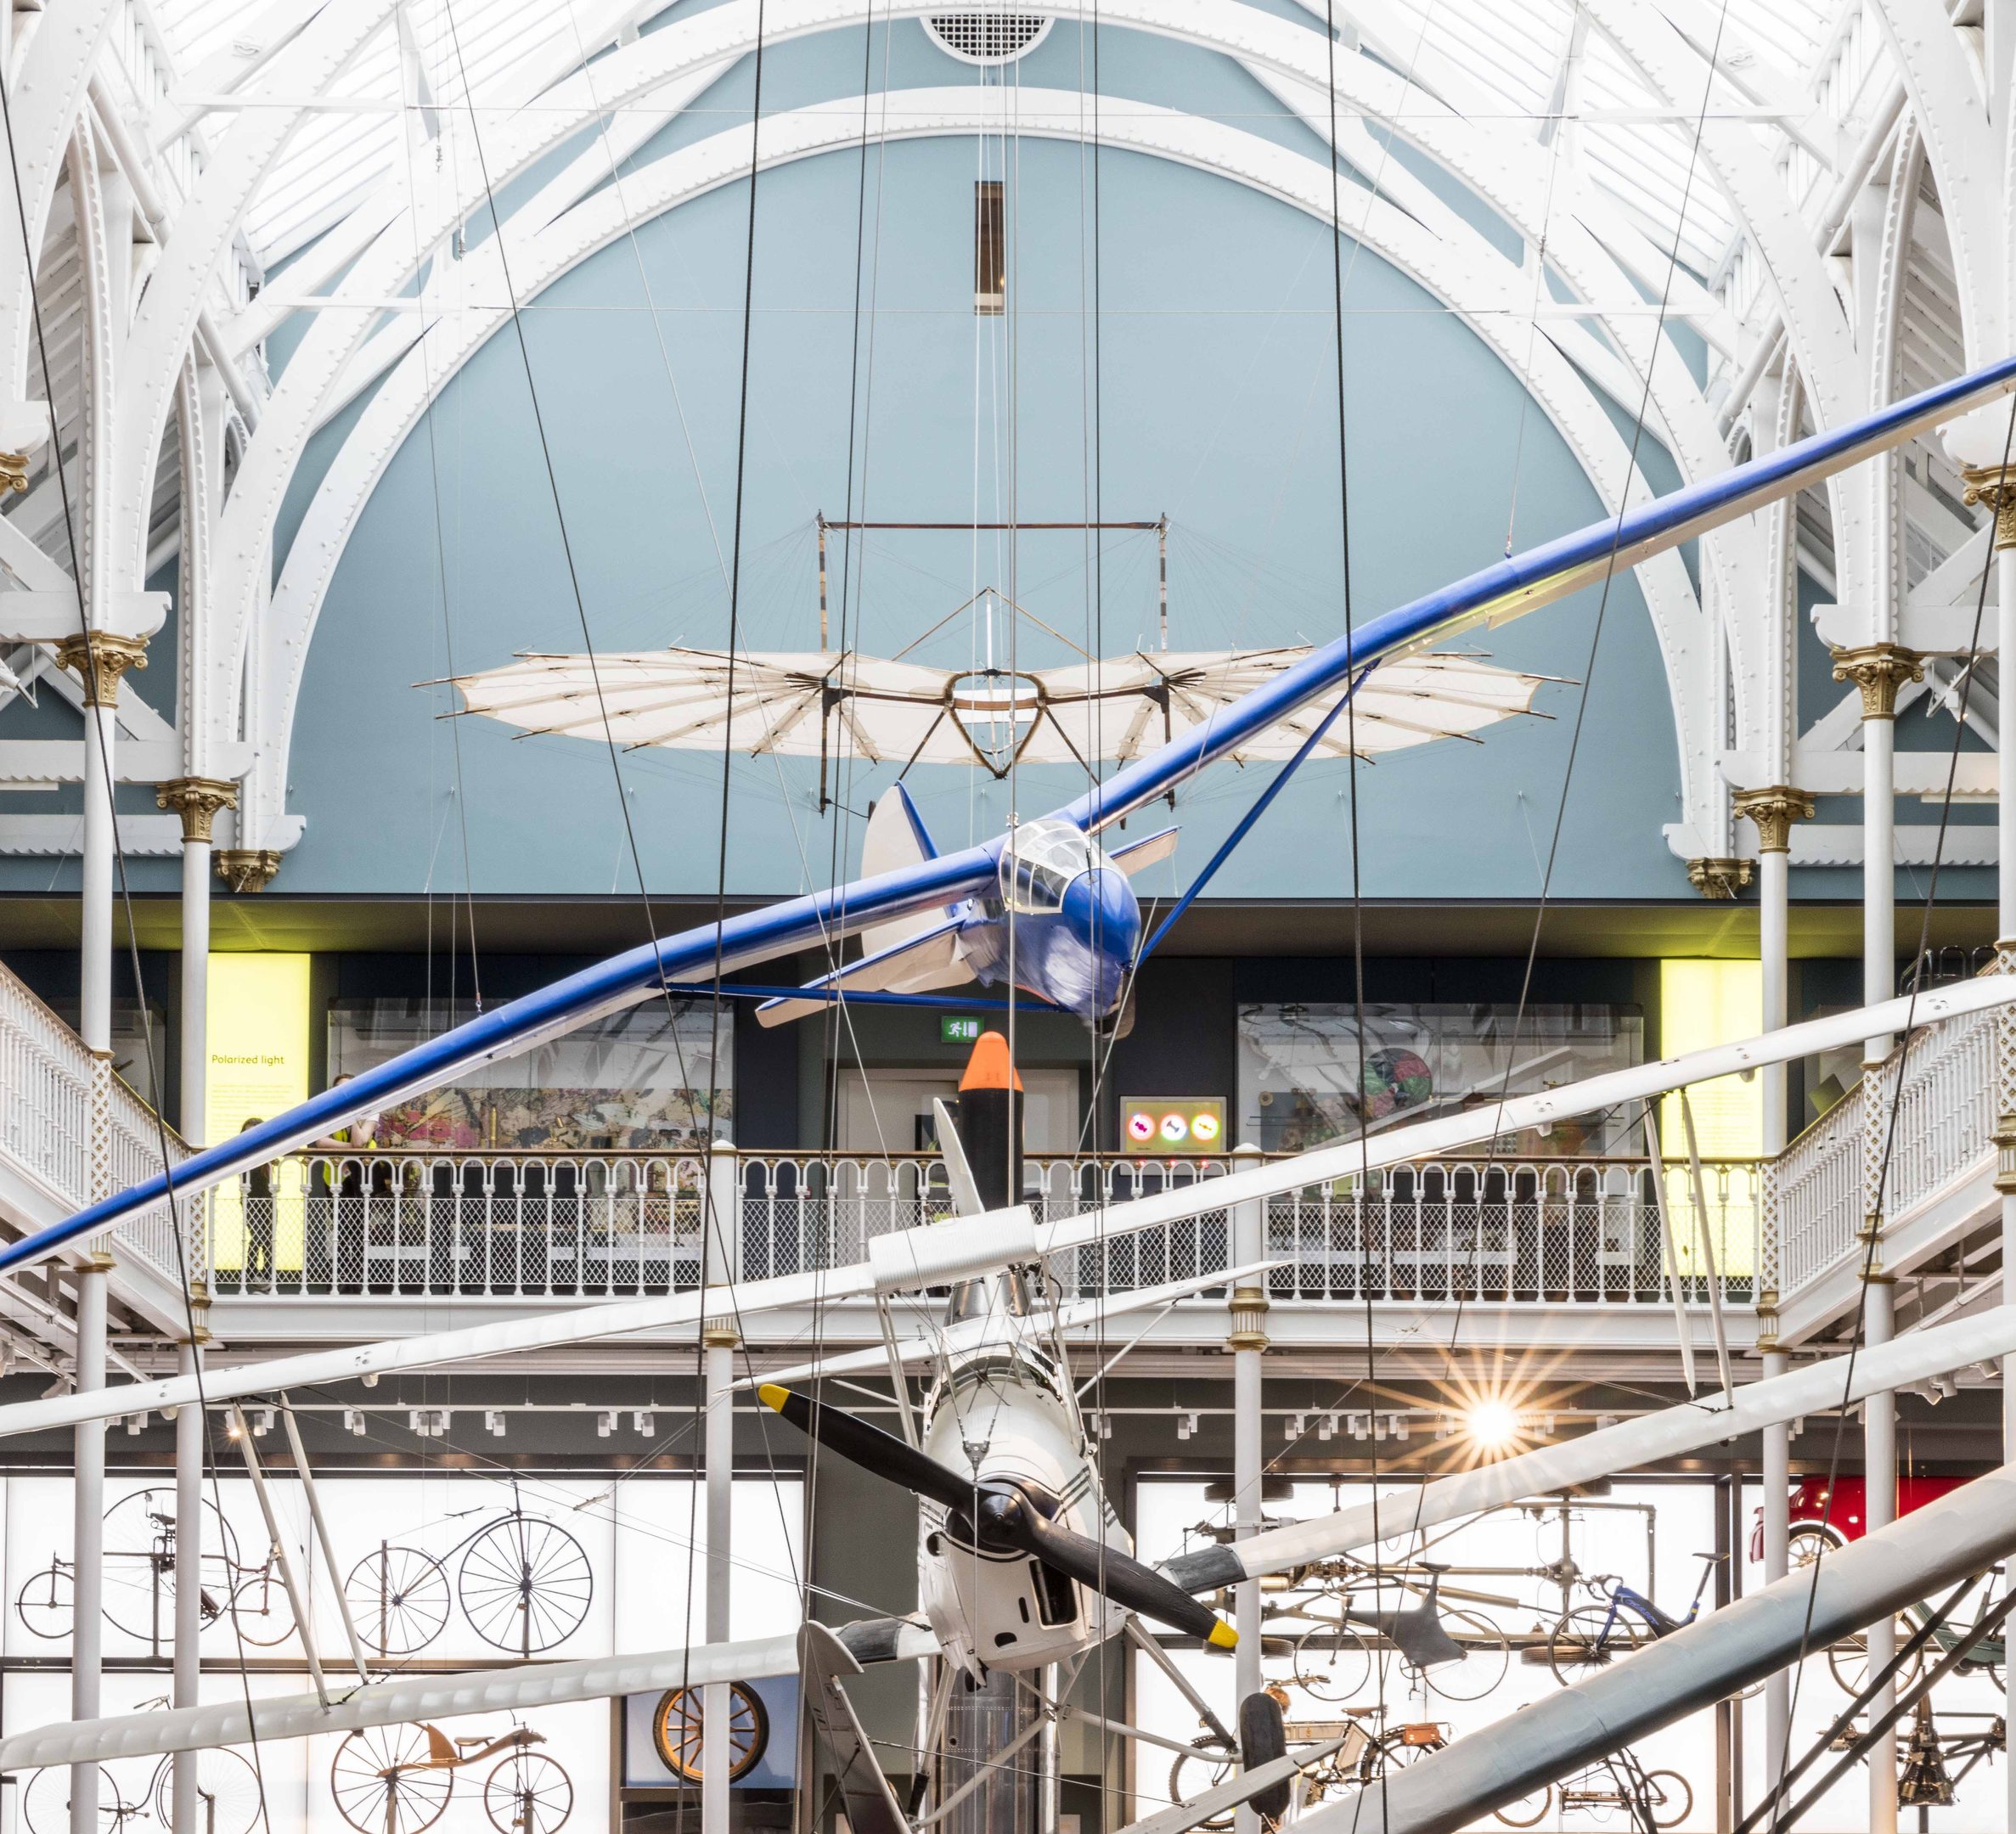 The Science and Technology Galleries at the National Museum of Scotland (National Museum of Scotland)